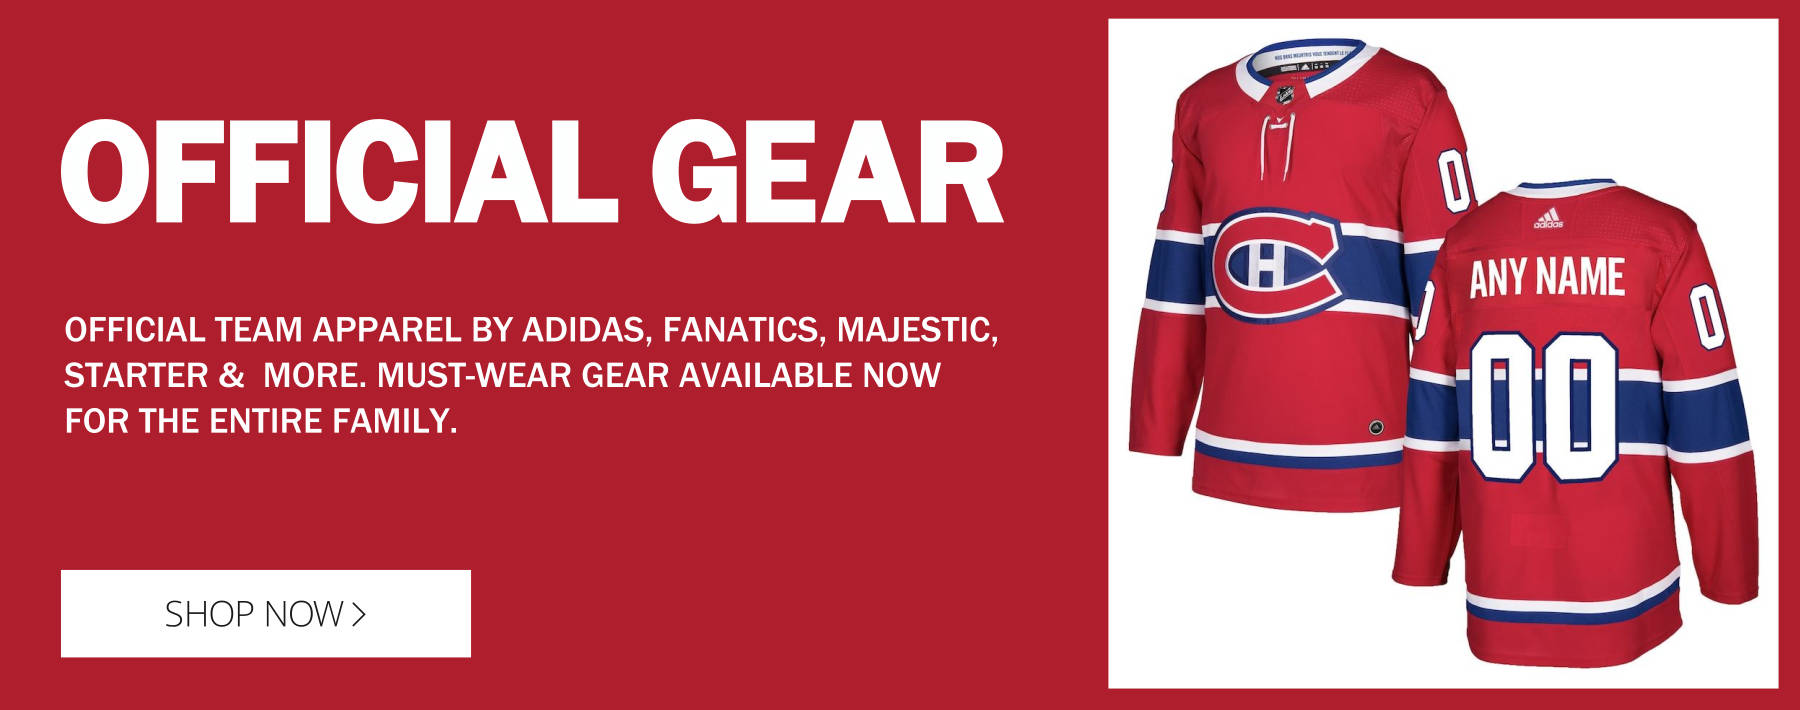 Officially Licensed Montreal Canadiens Gear and Merchandise 